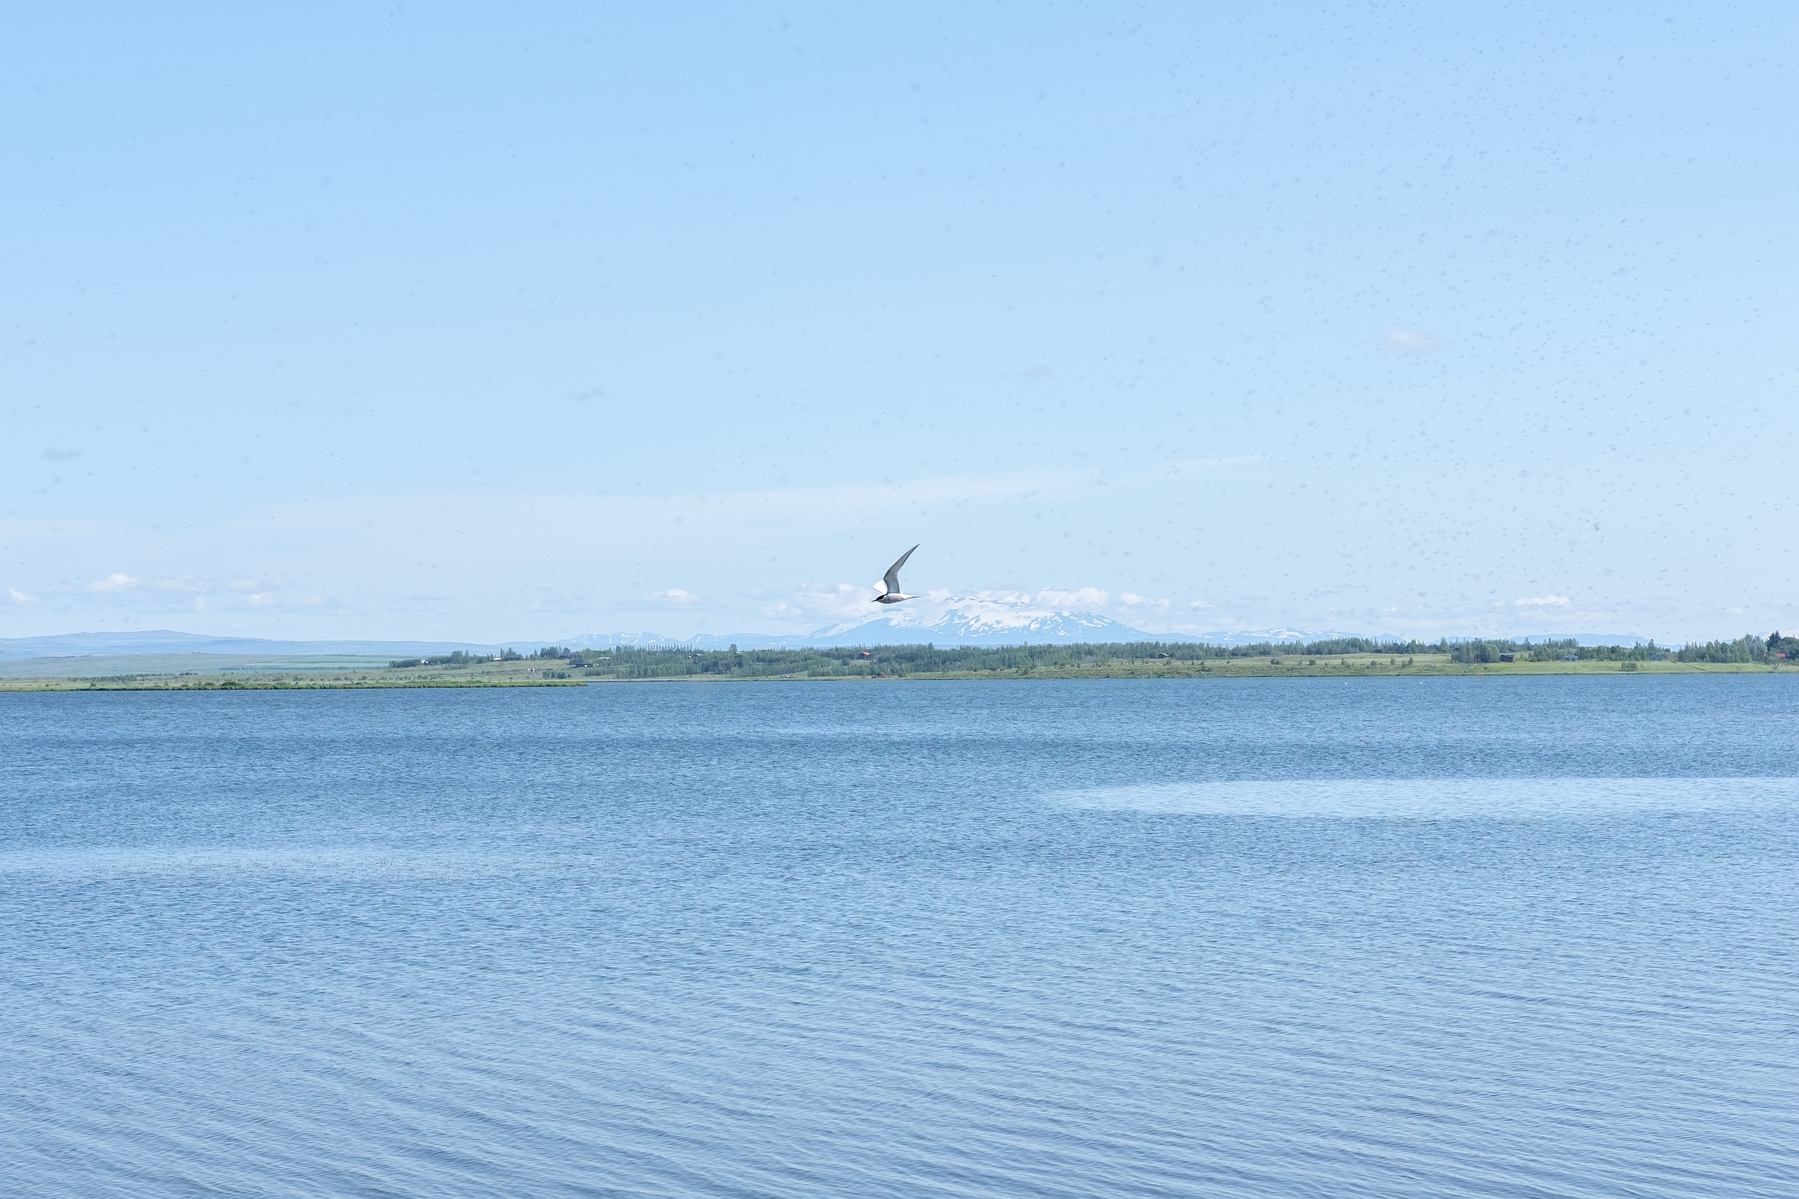 An arctic tern flies over Laugarvatn. The picture is extremely blue.